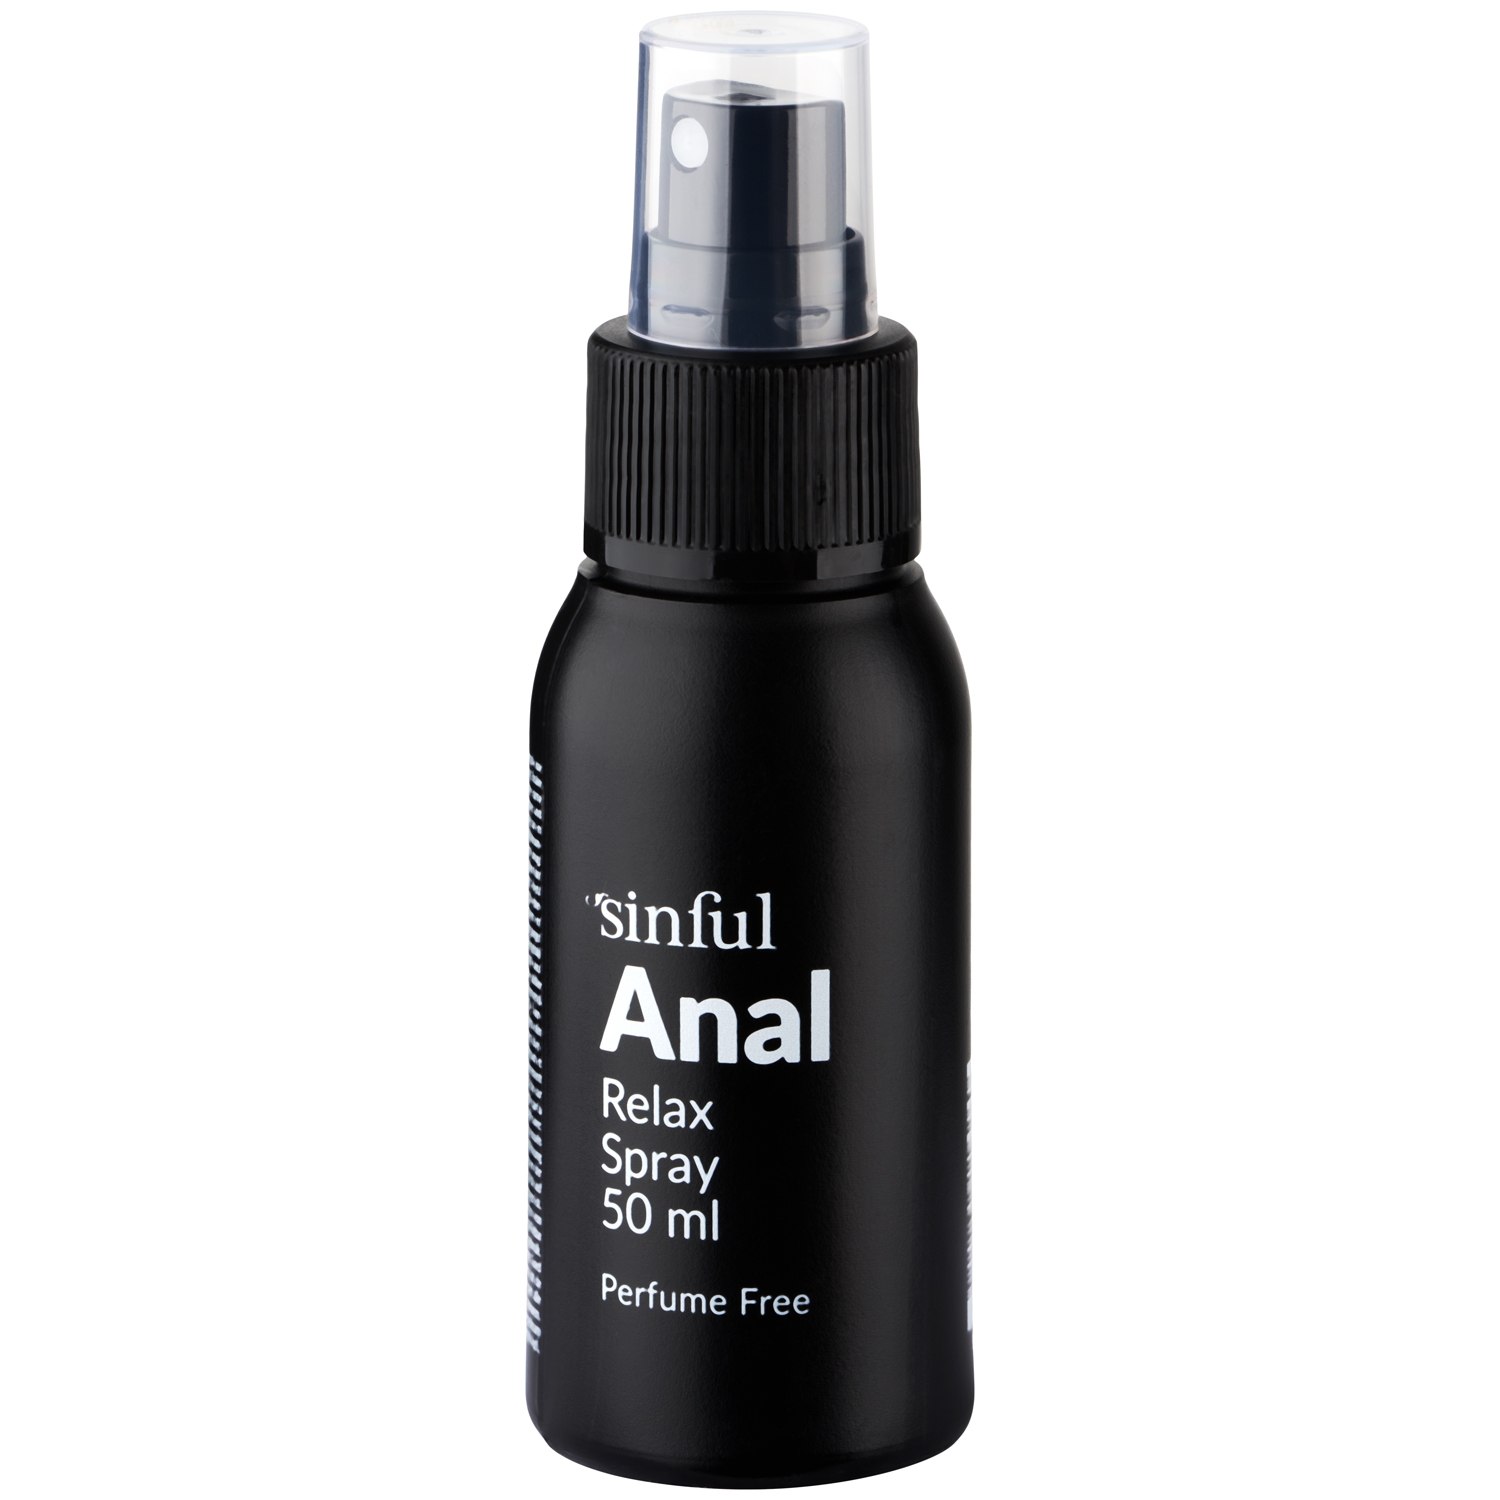 Sinful Anal Relax Spray 50 ml